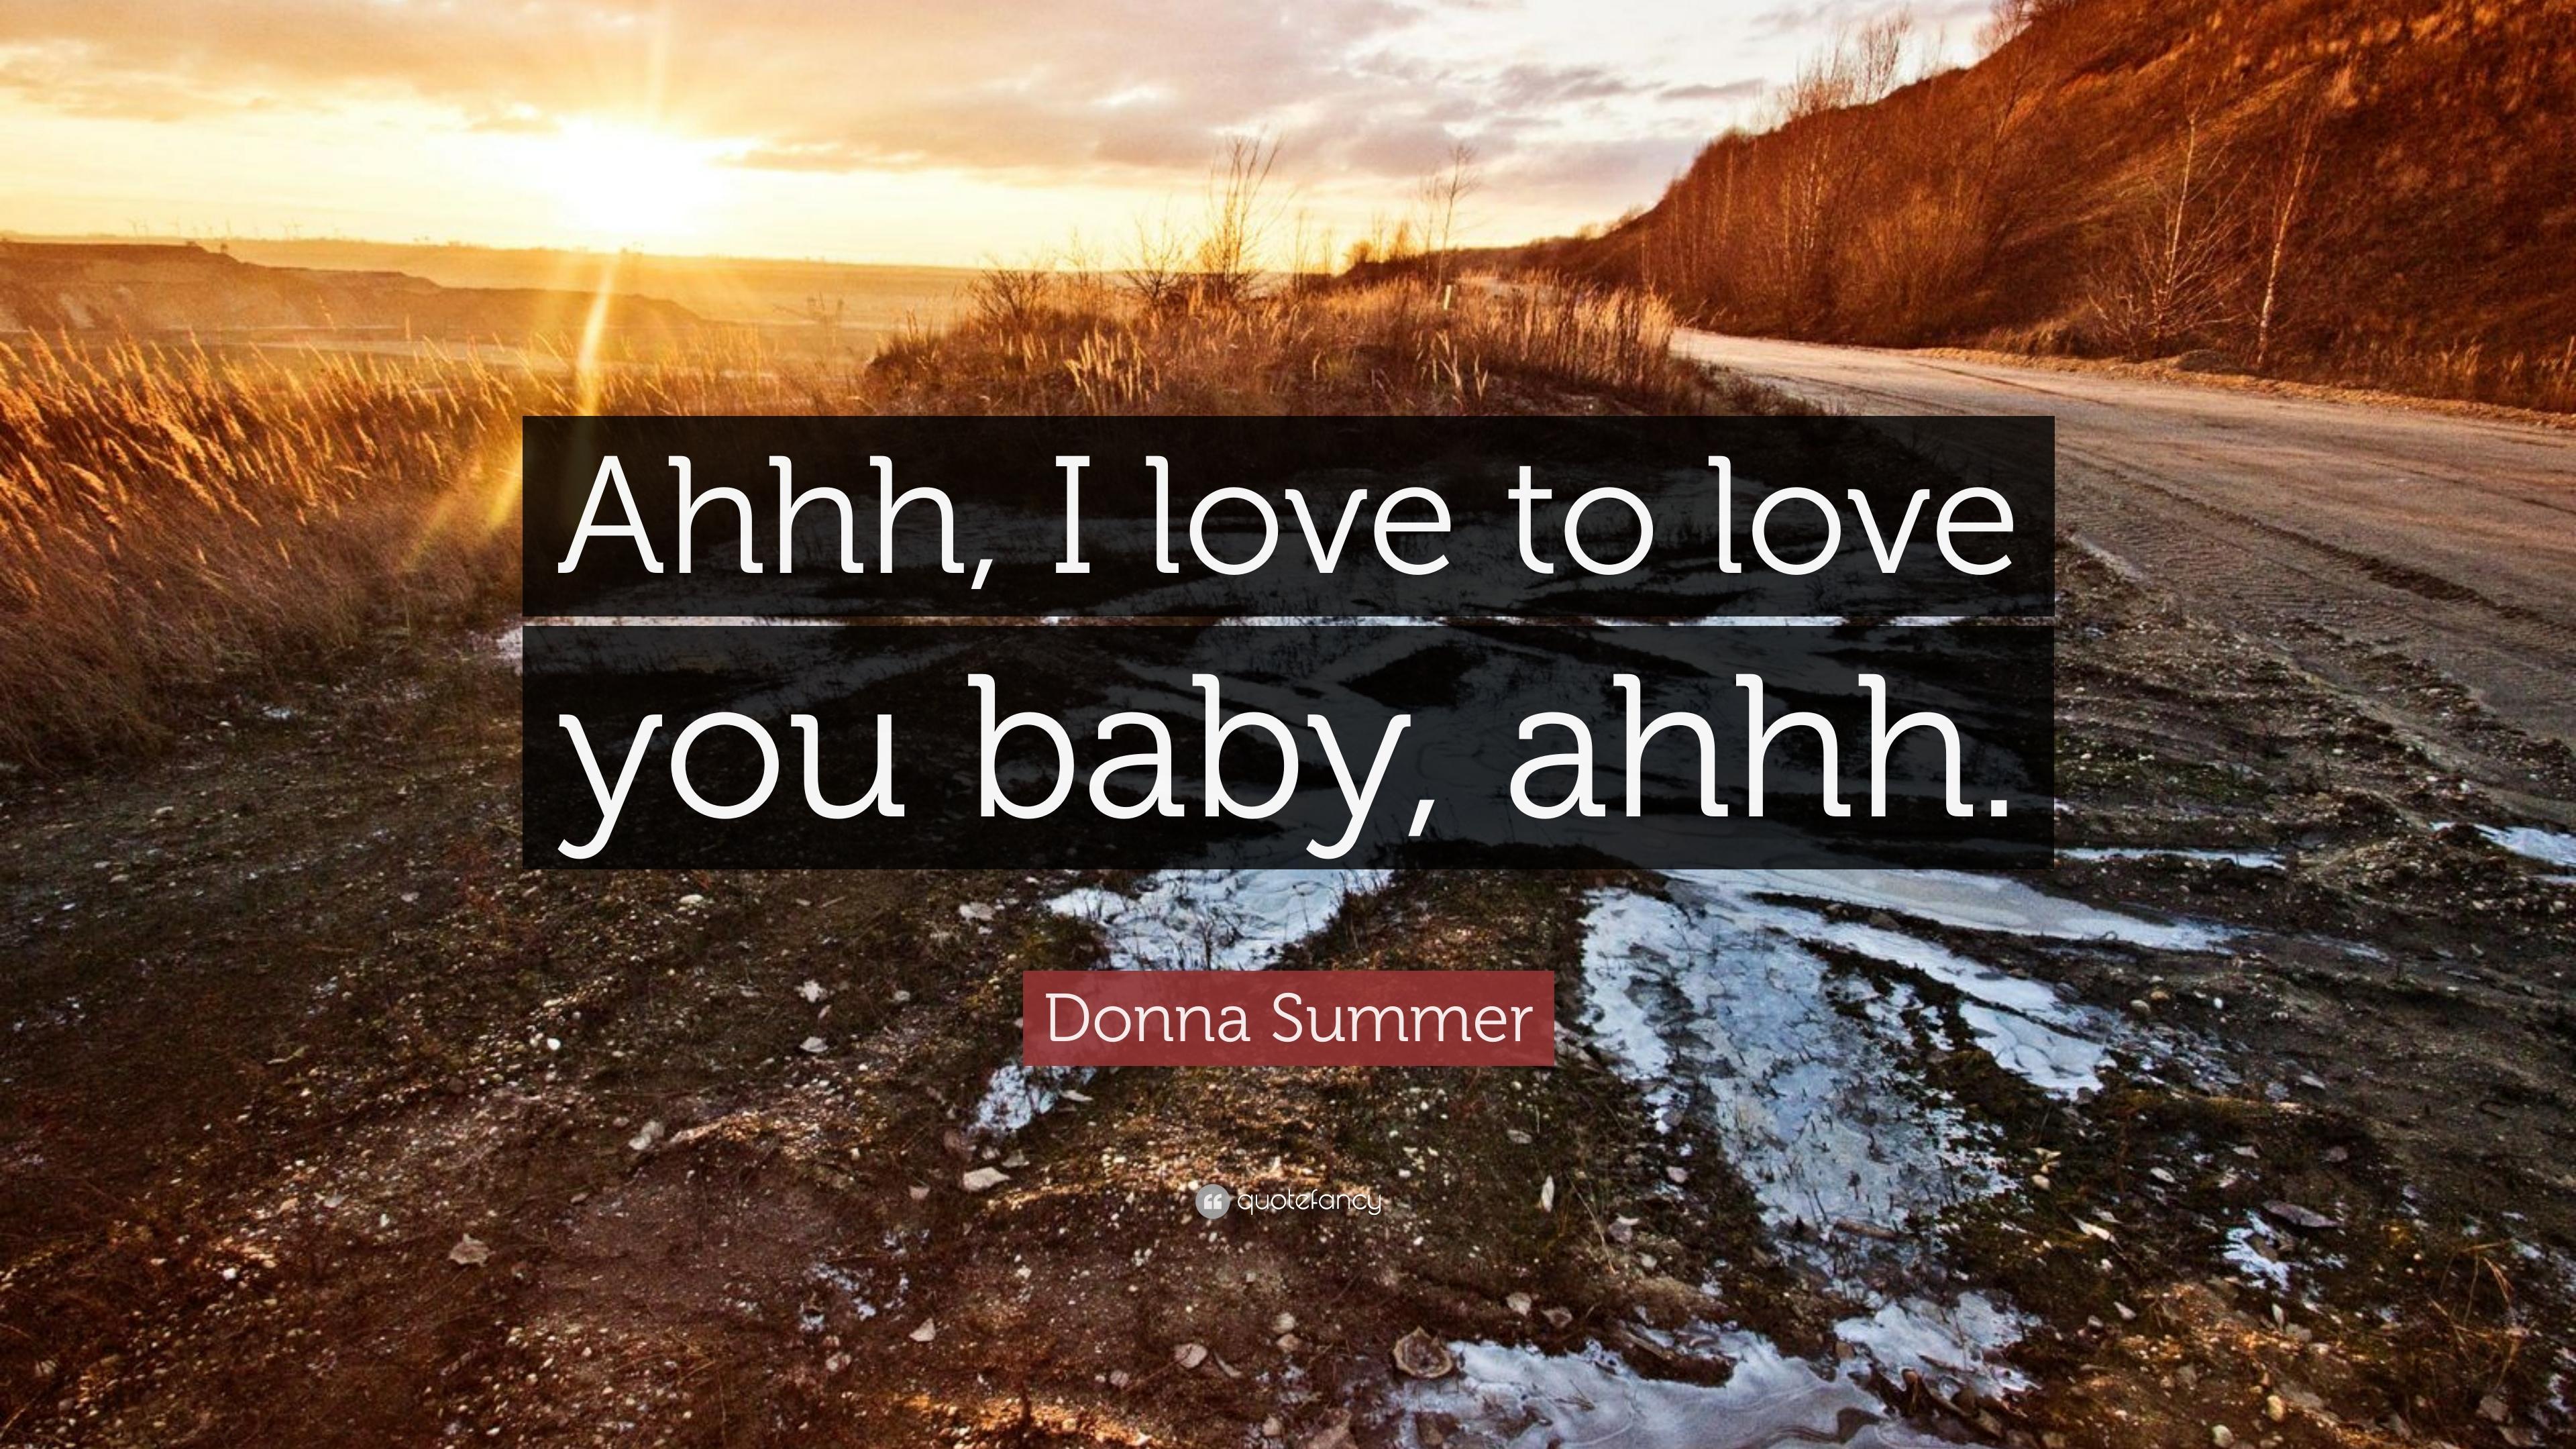 Donna Summer Quote: “Ahhh, I love to love you baby, ahhh.” (7 wallpaper)